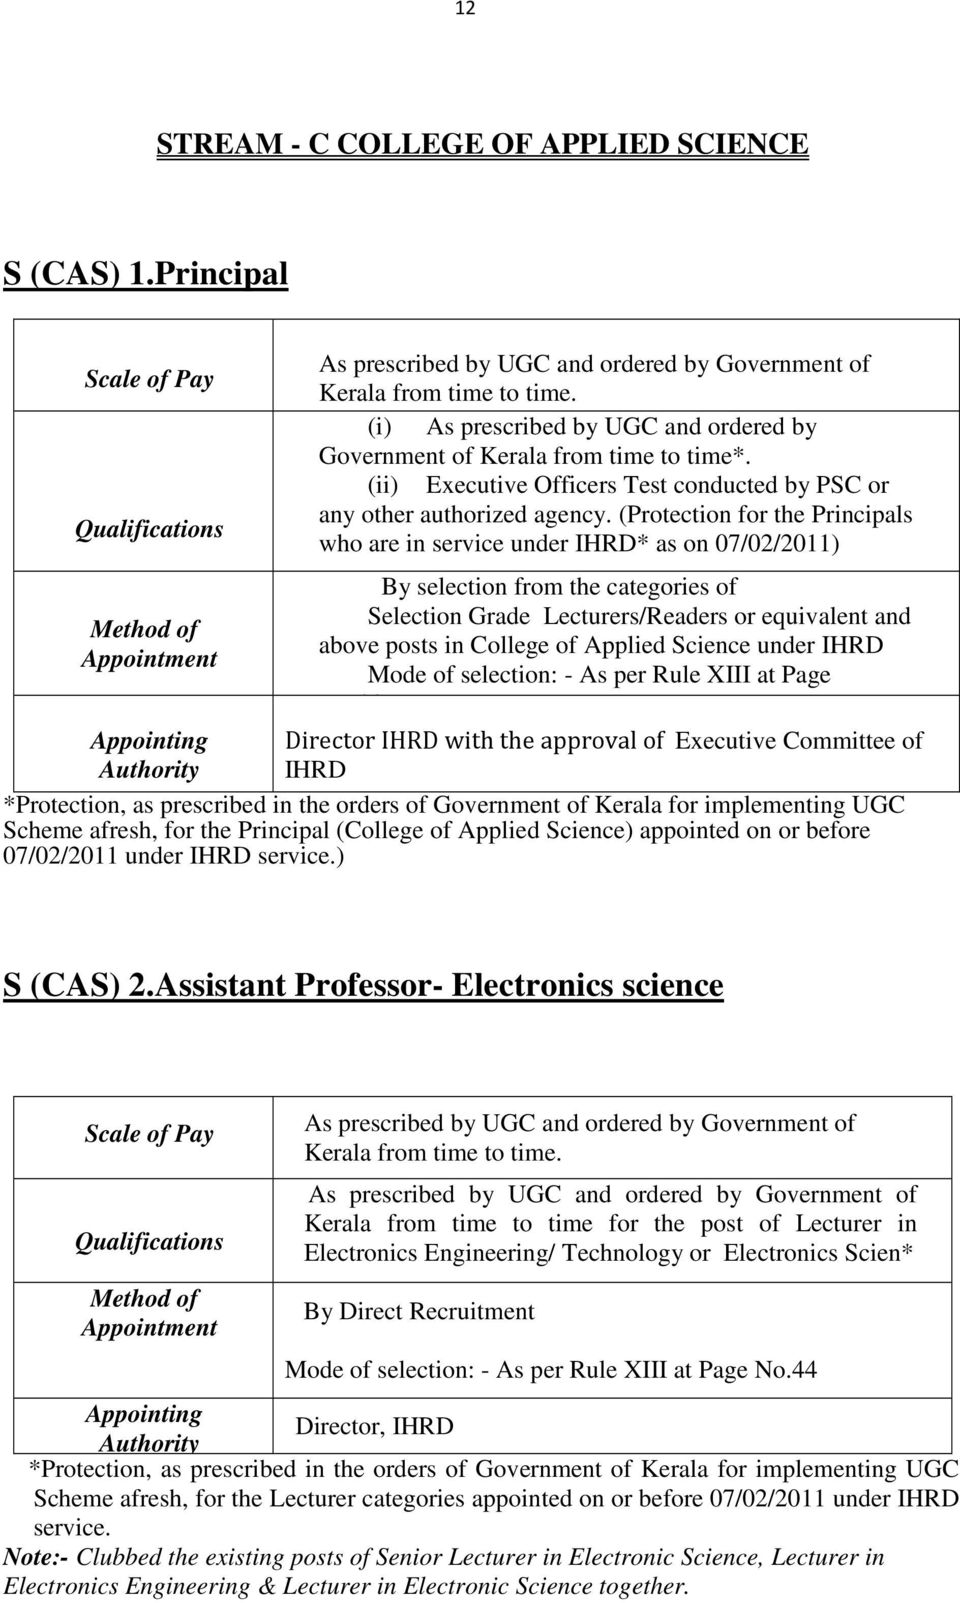 (Protection for the Principals who are in service under IHRD* as on 07/02/2011) By selection from the categories of Selection Grade Lecturers/Readers or equivalent and above posts in College of